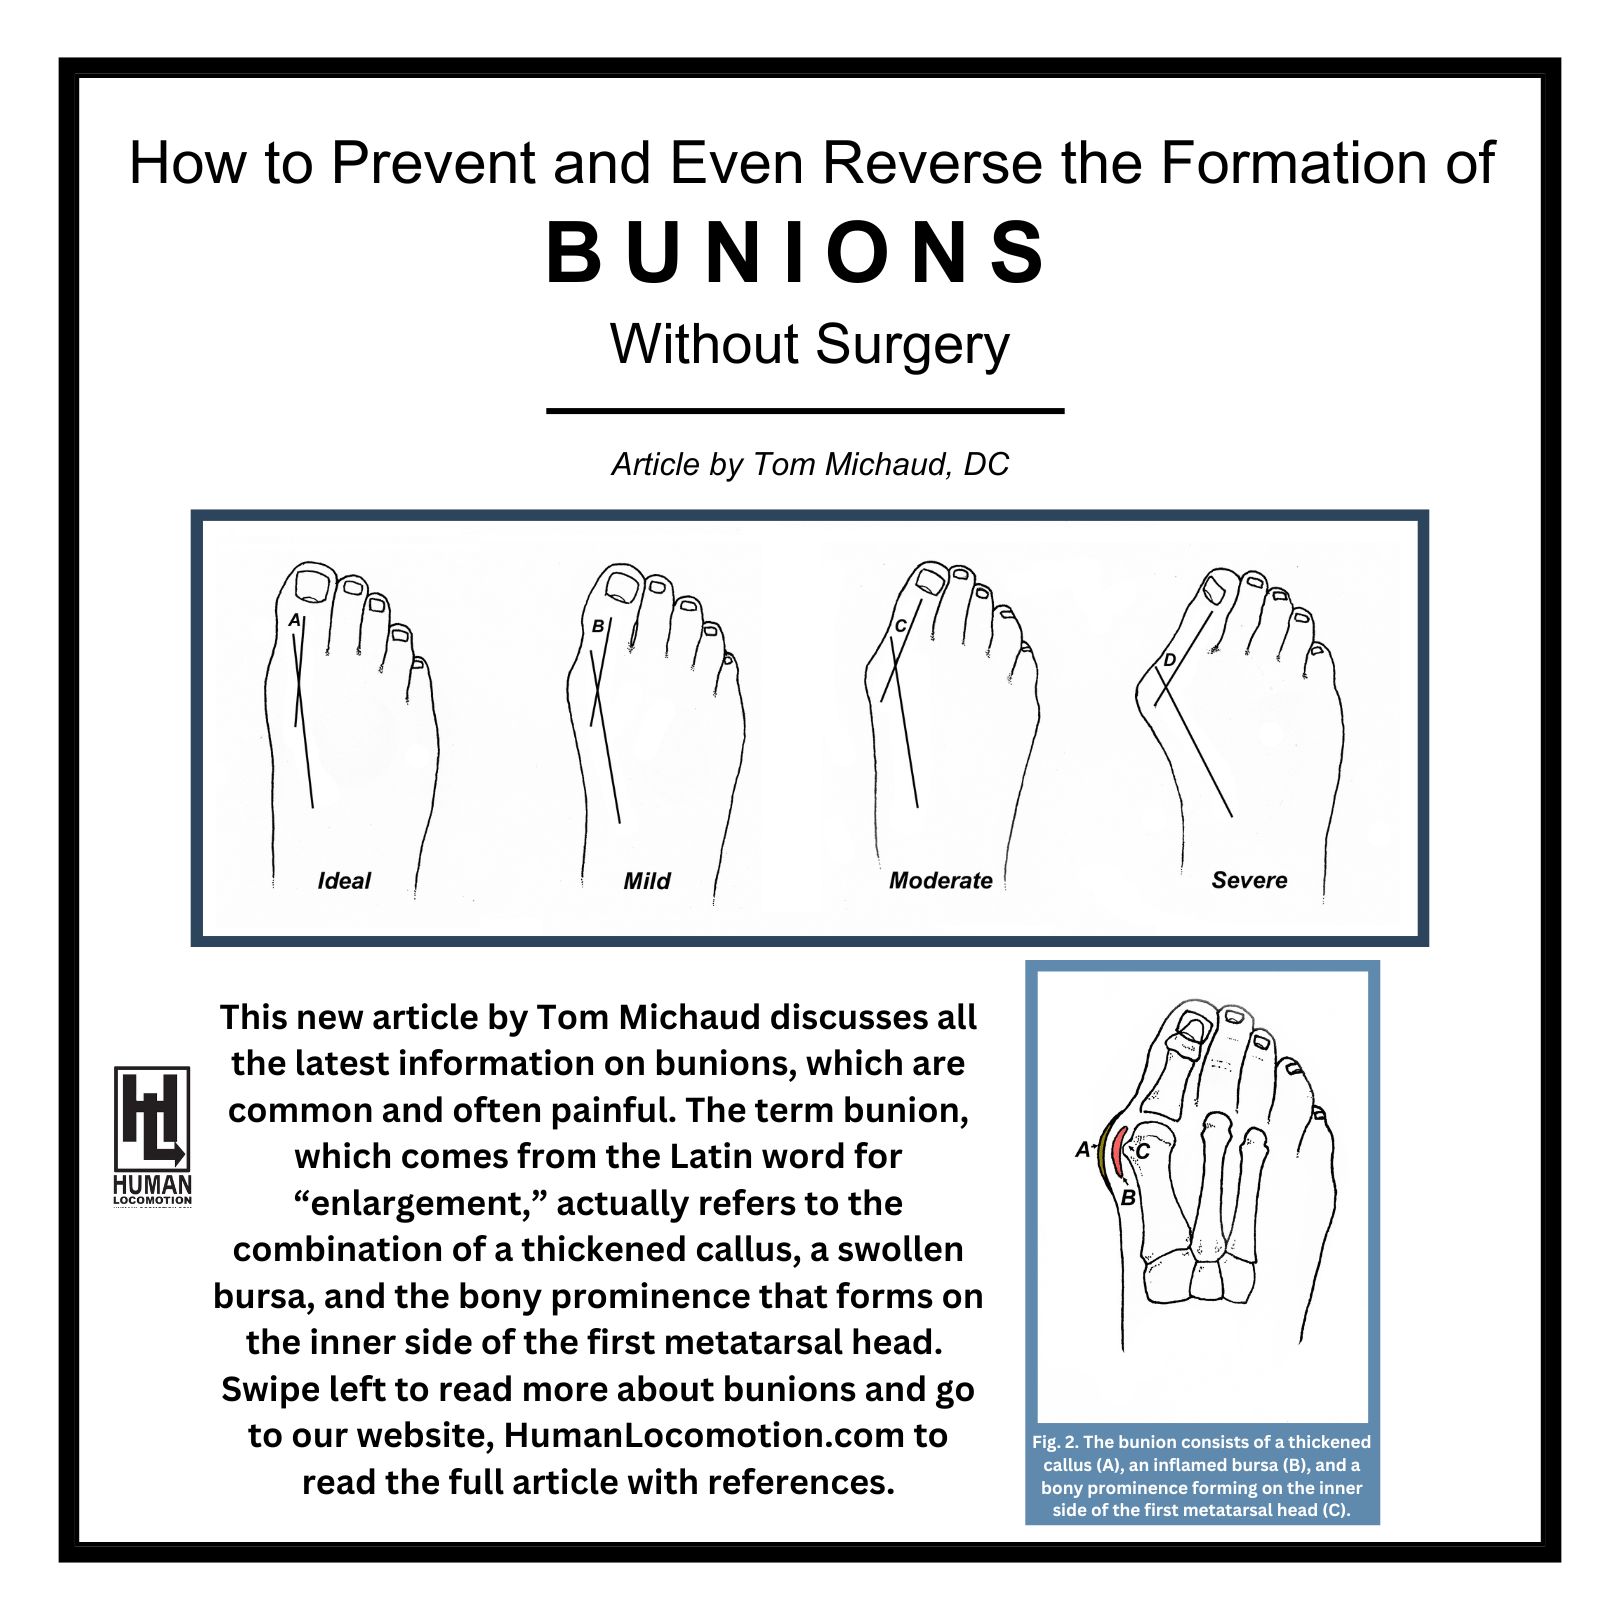 How to Prevent and Even Reverse the Formation of Bunions Without Surgery